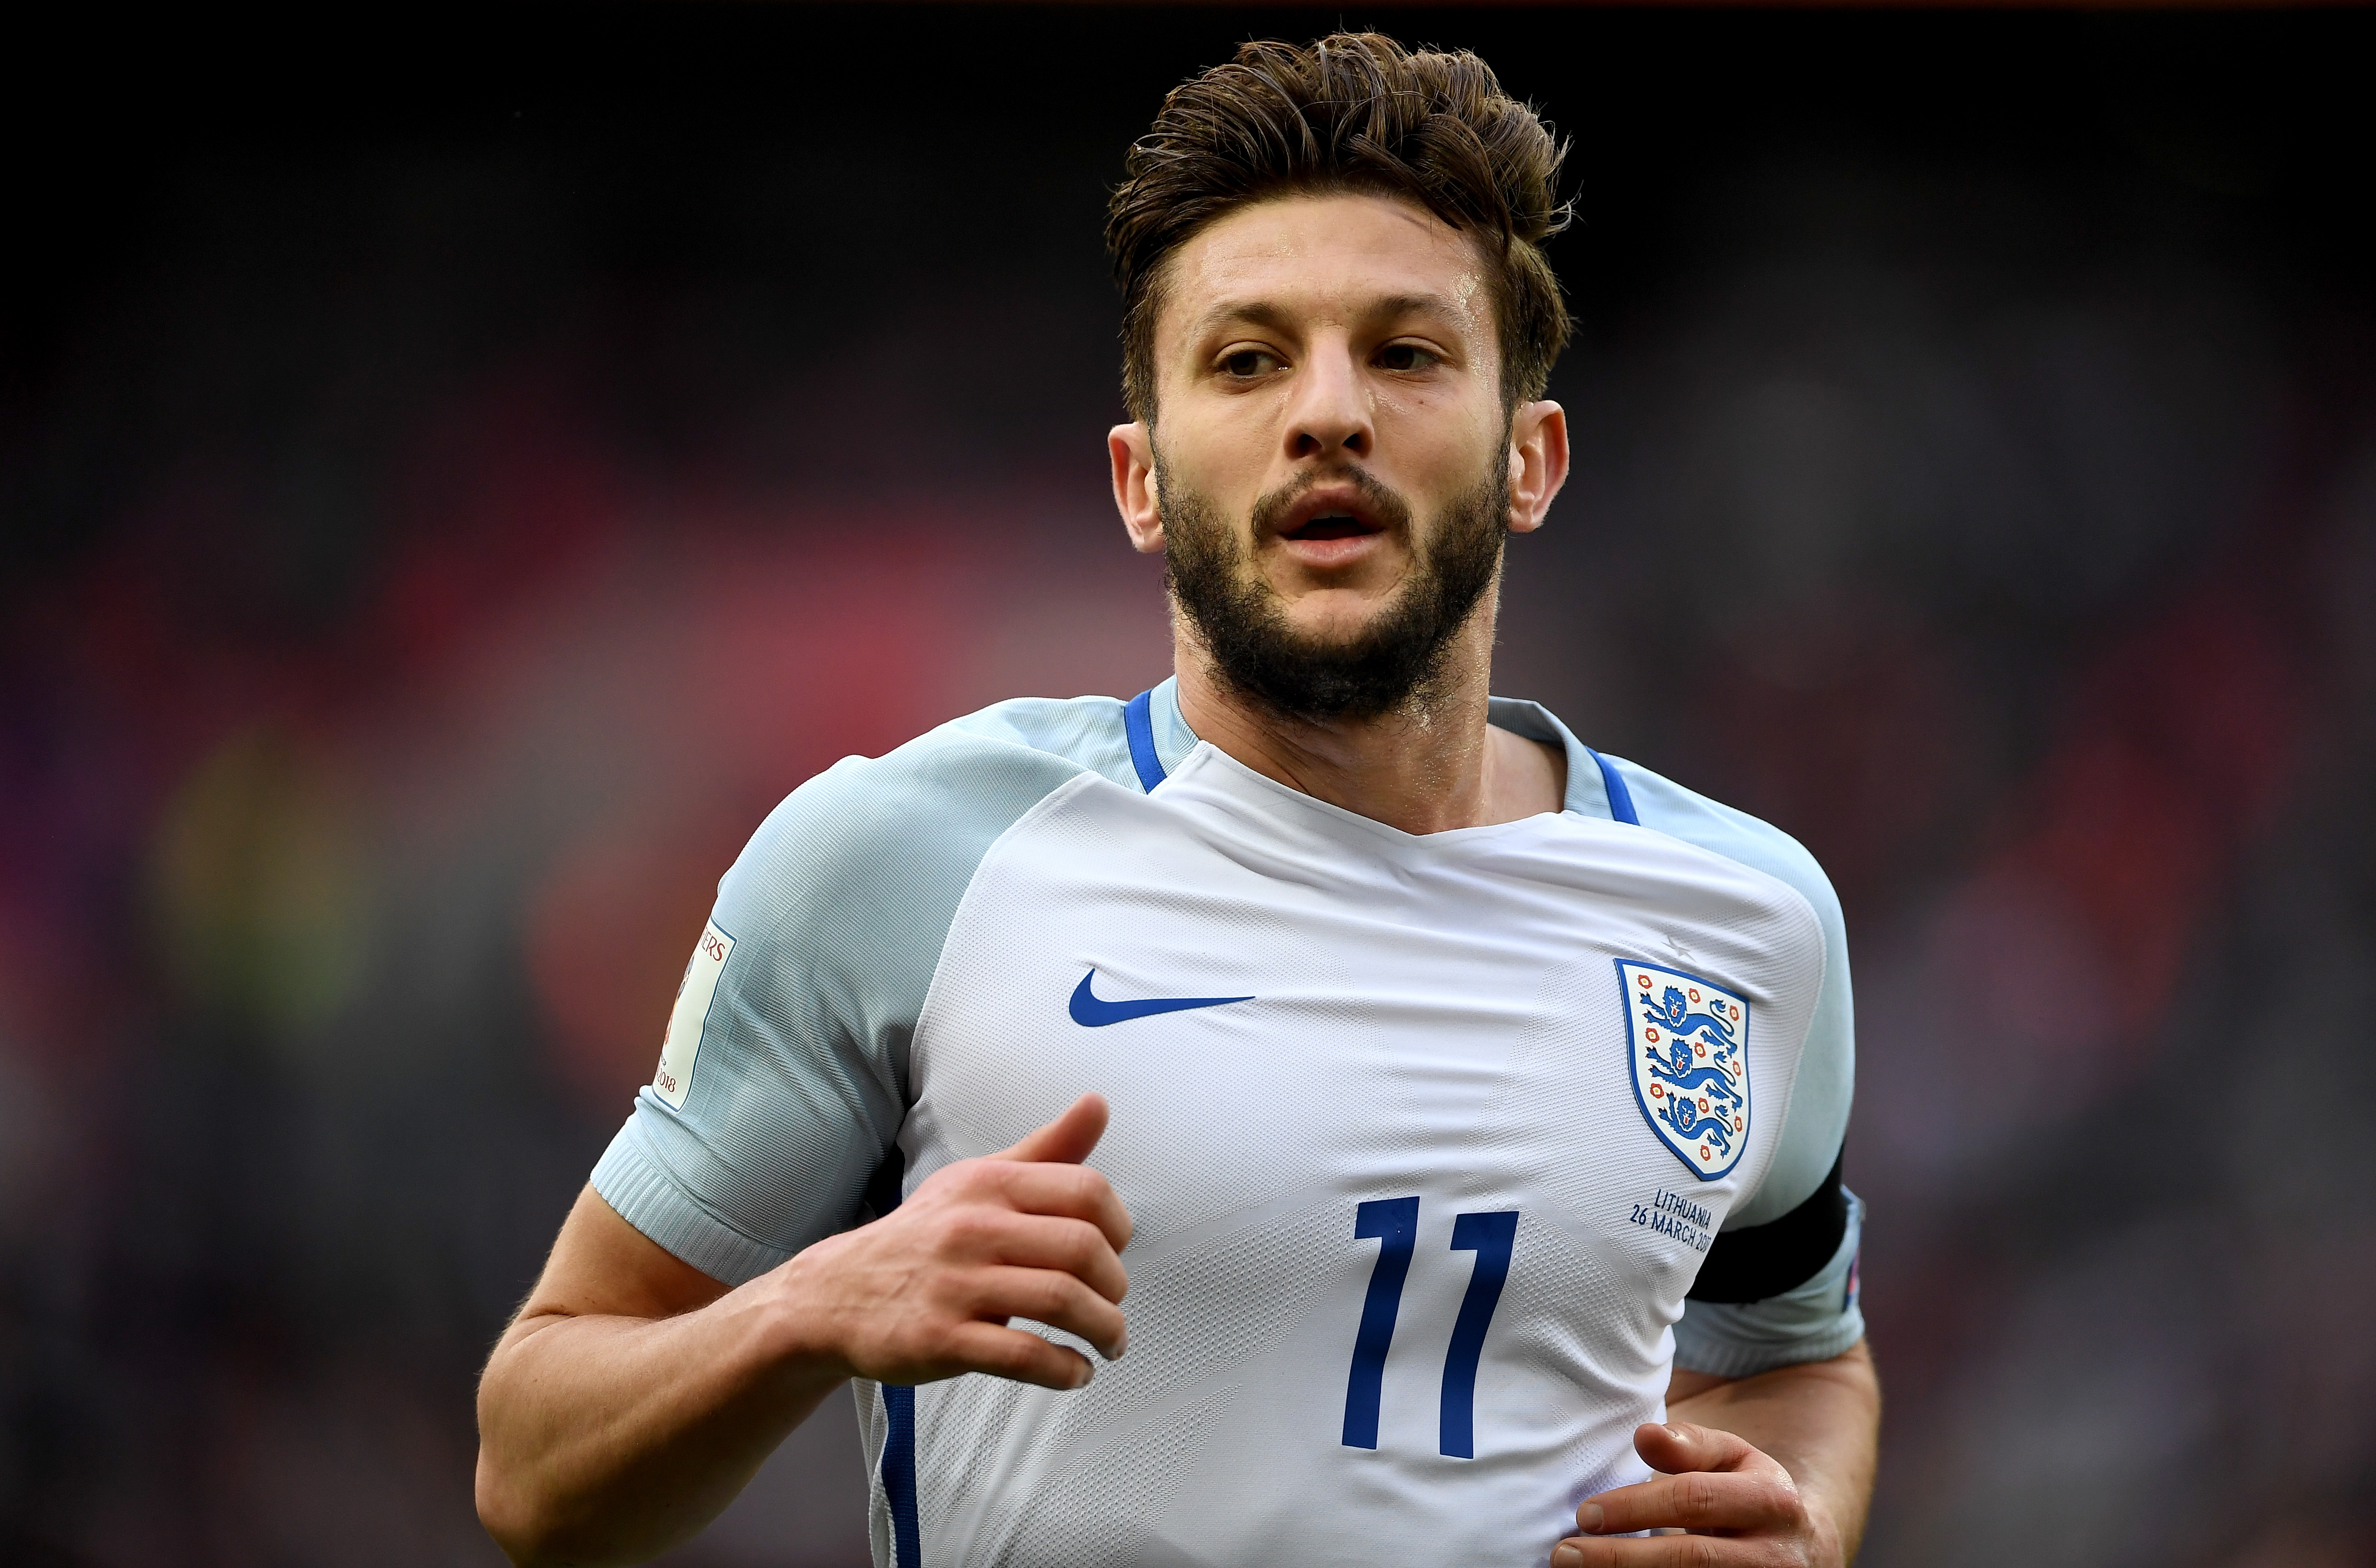 LONDON, ENGLAND - MARCH 26: Adam Lallana of England looks on during the FIFA 2018 World Cup Qualifier between England and Lithuania at Wembley Stadium on March 26, 2017 in London, England.  (Photo by Laurence Griffiths/Getty Images)